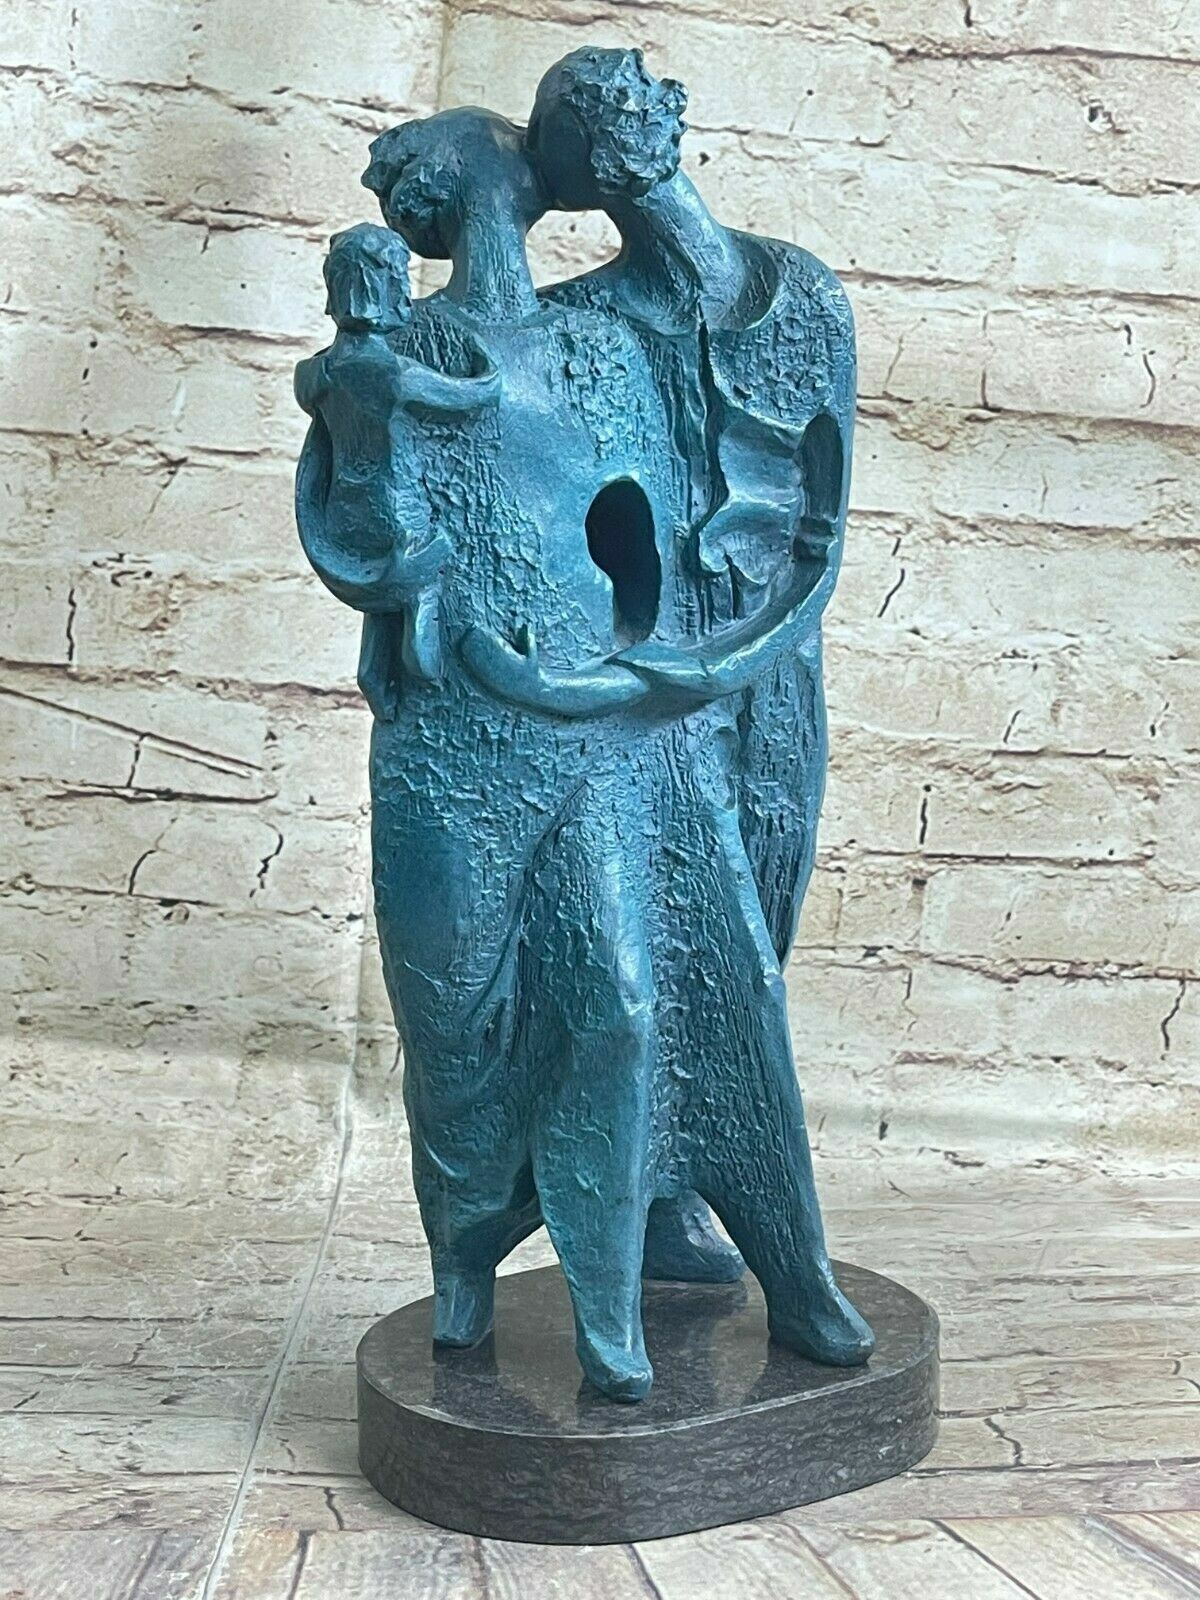 Modern Art Mid Century Man Woman and Baby by Salvador Dali Bronze Sculpture Stat